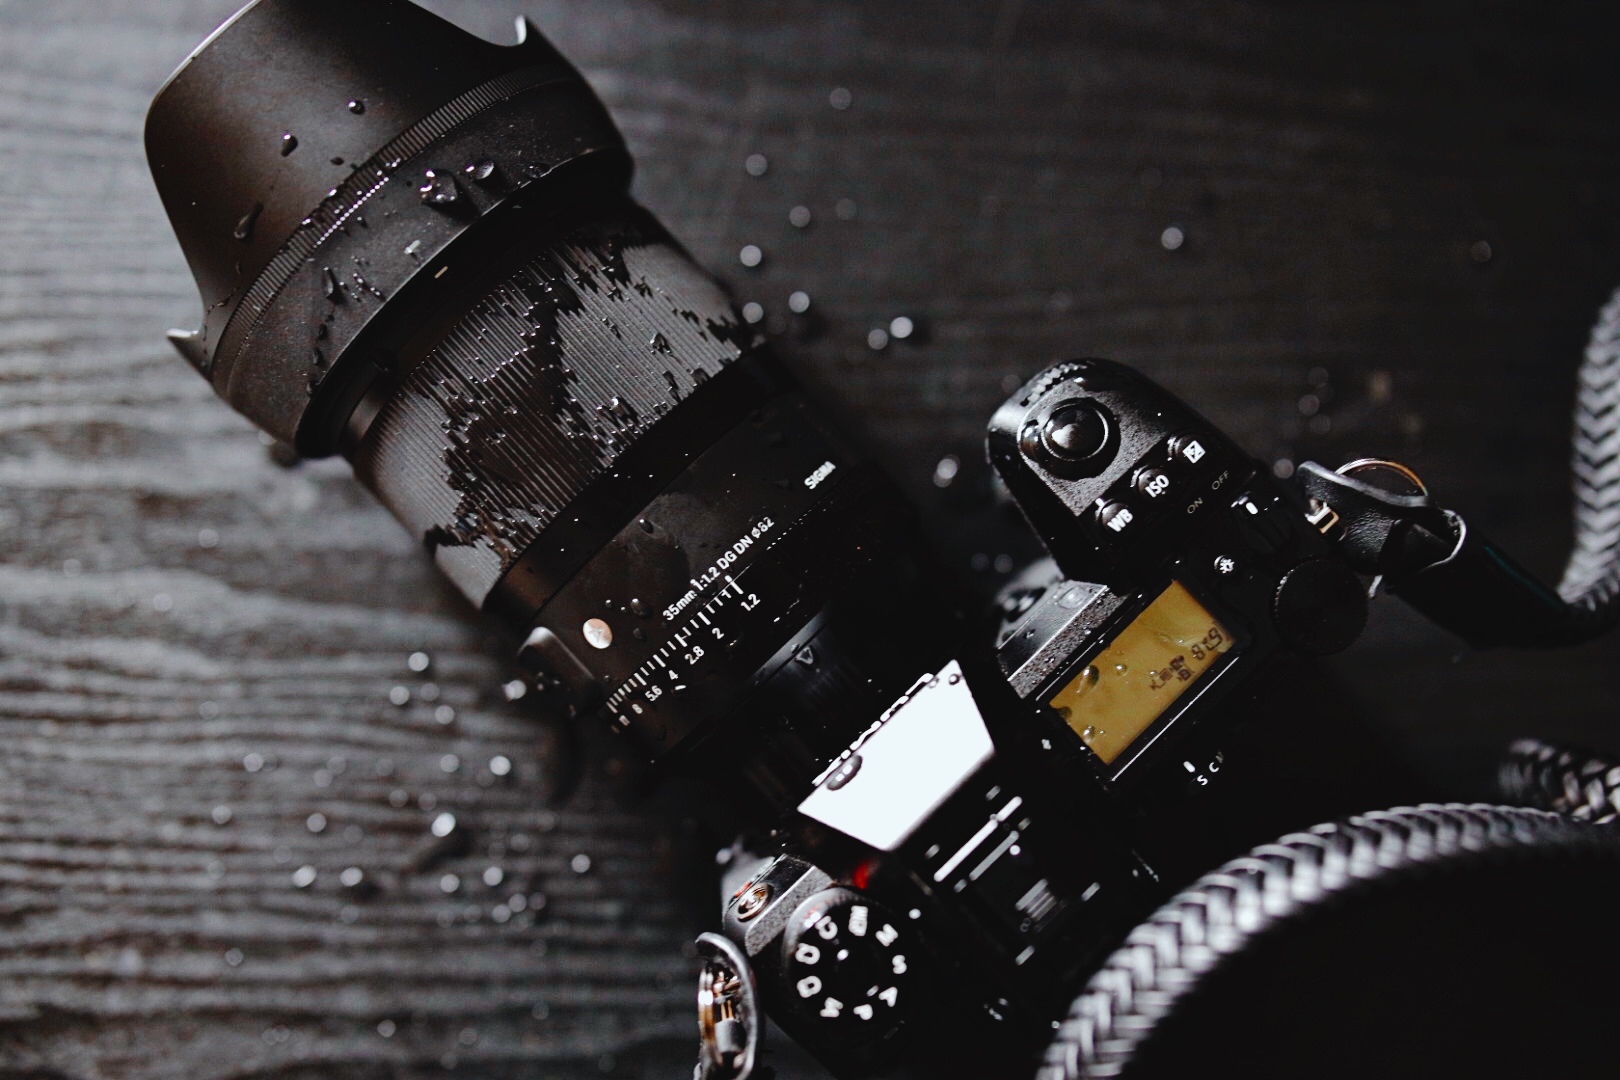 7 Pieces of Photography Gear Our Readers Were Excited About in October